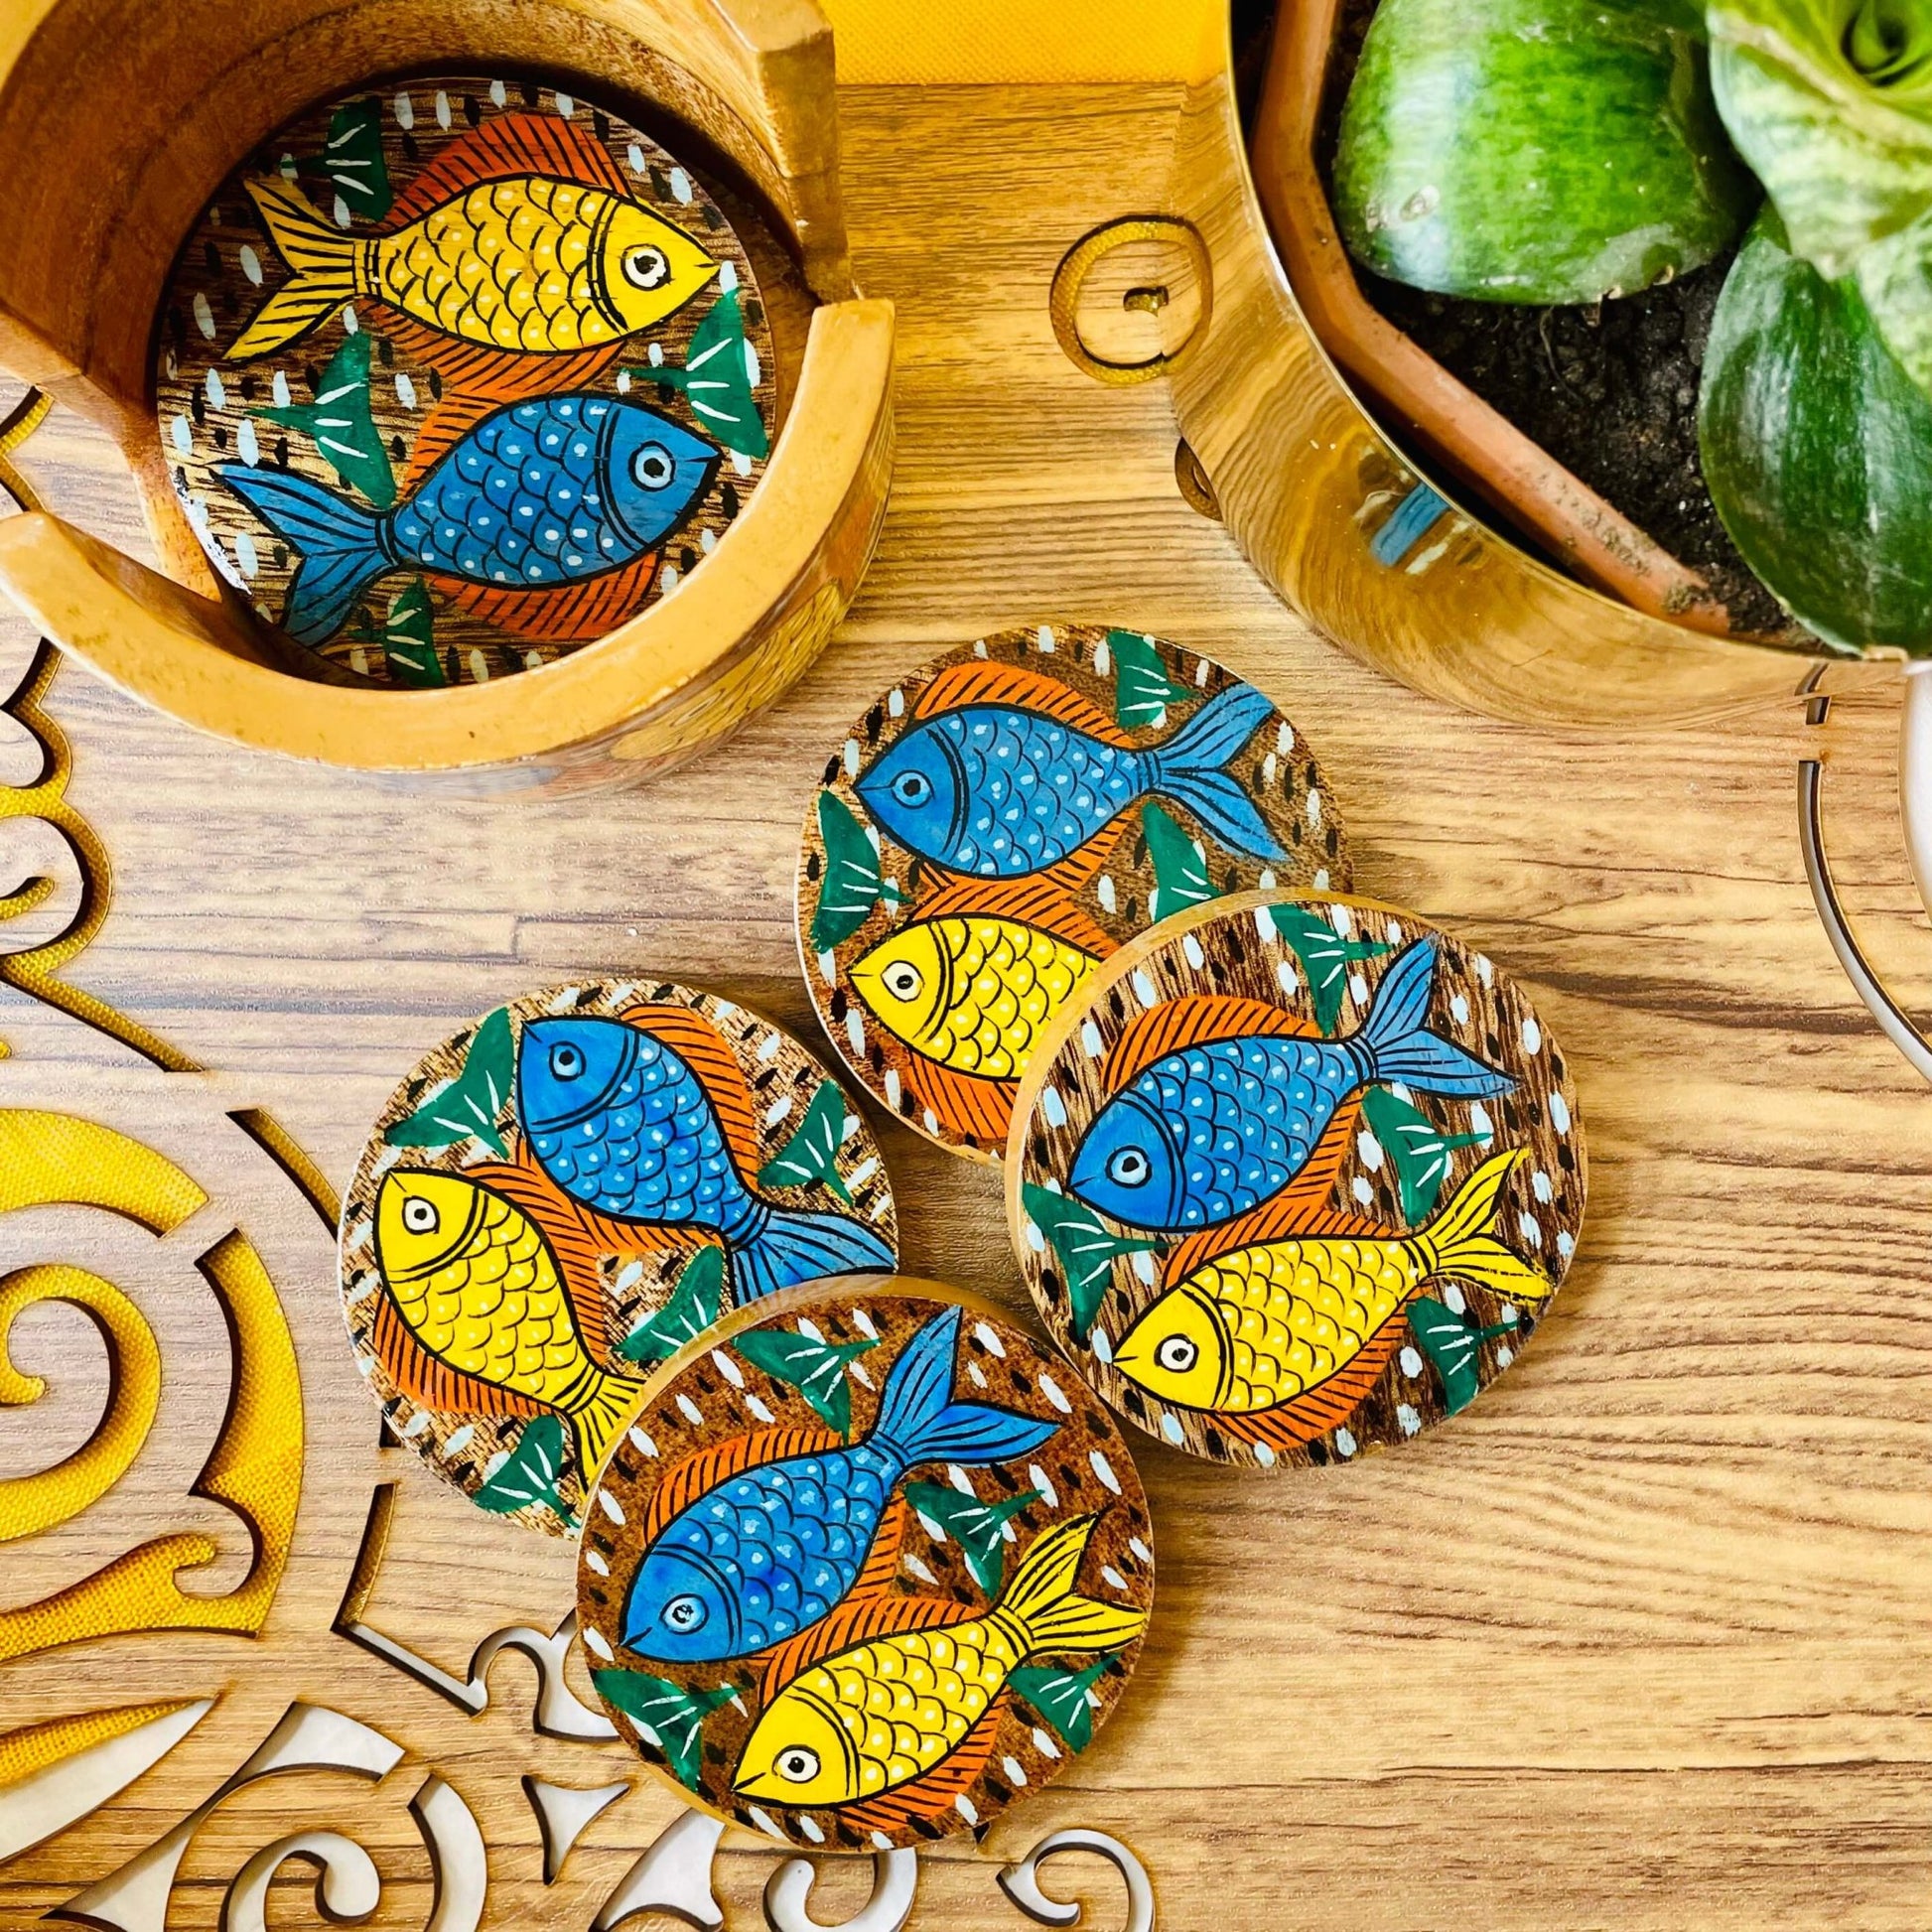 One pure mango wood round wooden coaster is placed in a wood coaster holder while 4 round wooden coaster hand painted with blue and yellow fish being displayed near a flower pot.